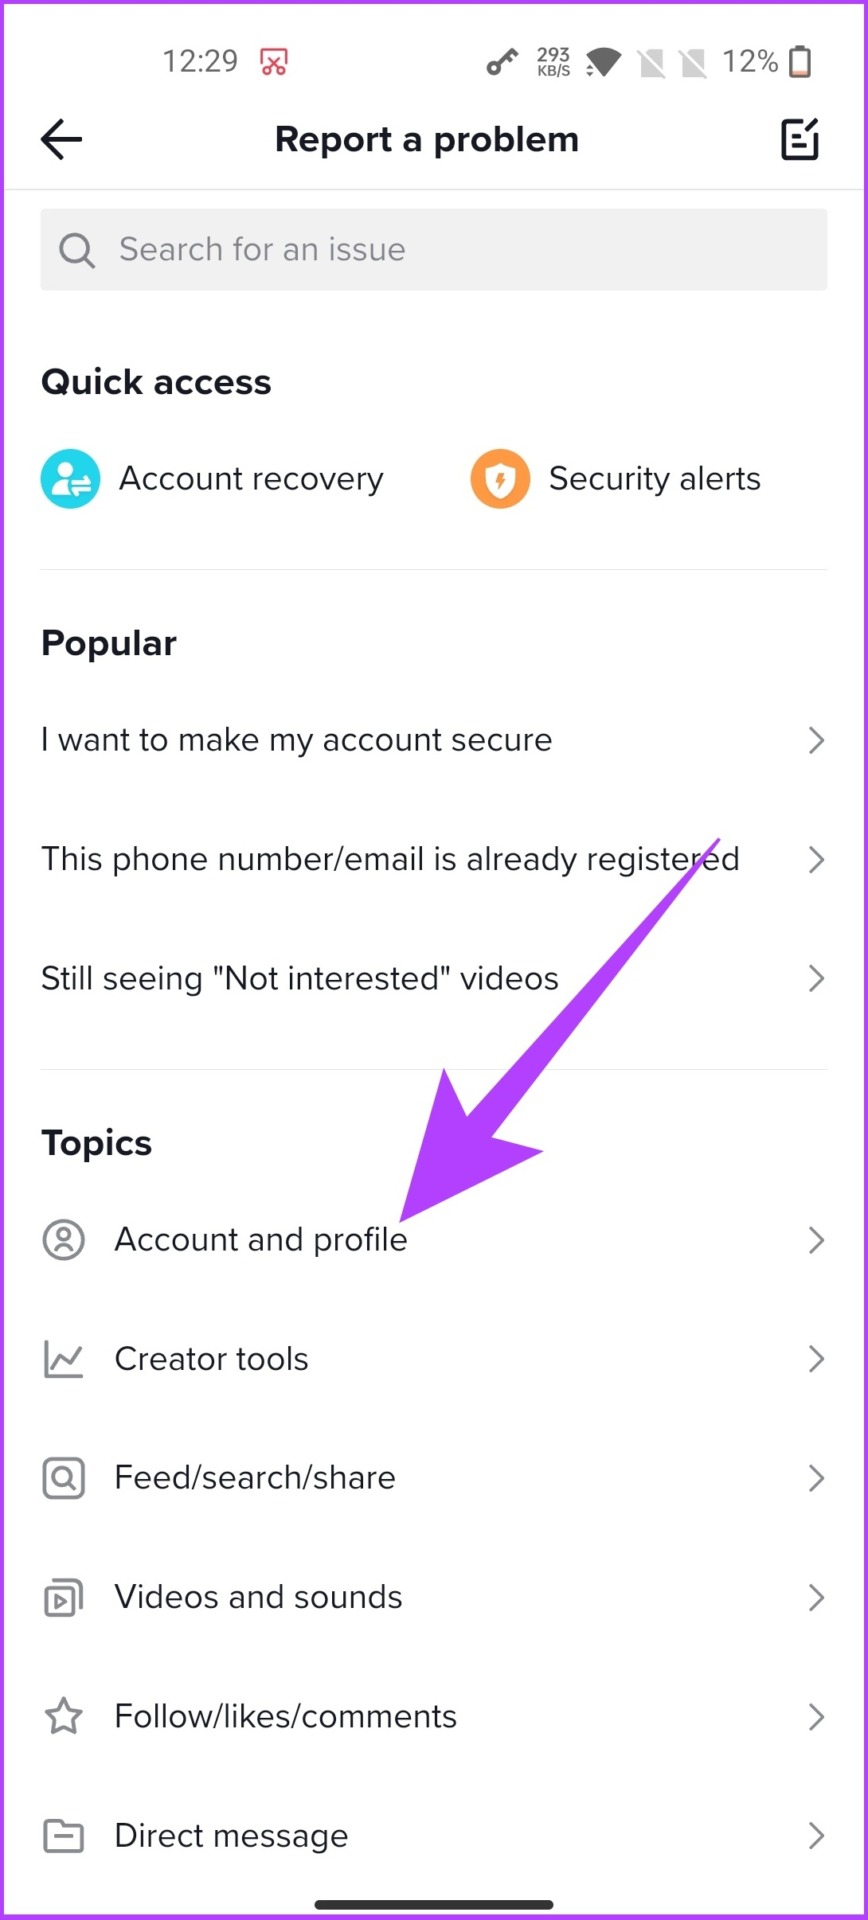 select Account and profile